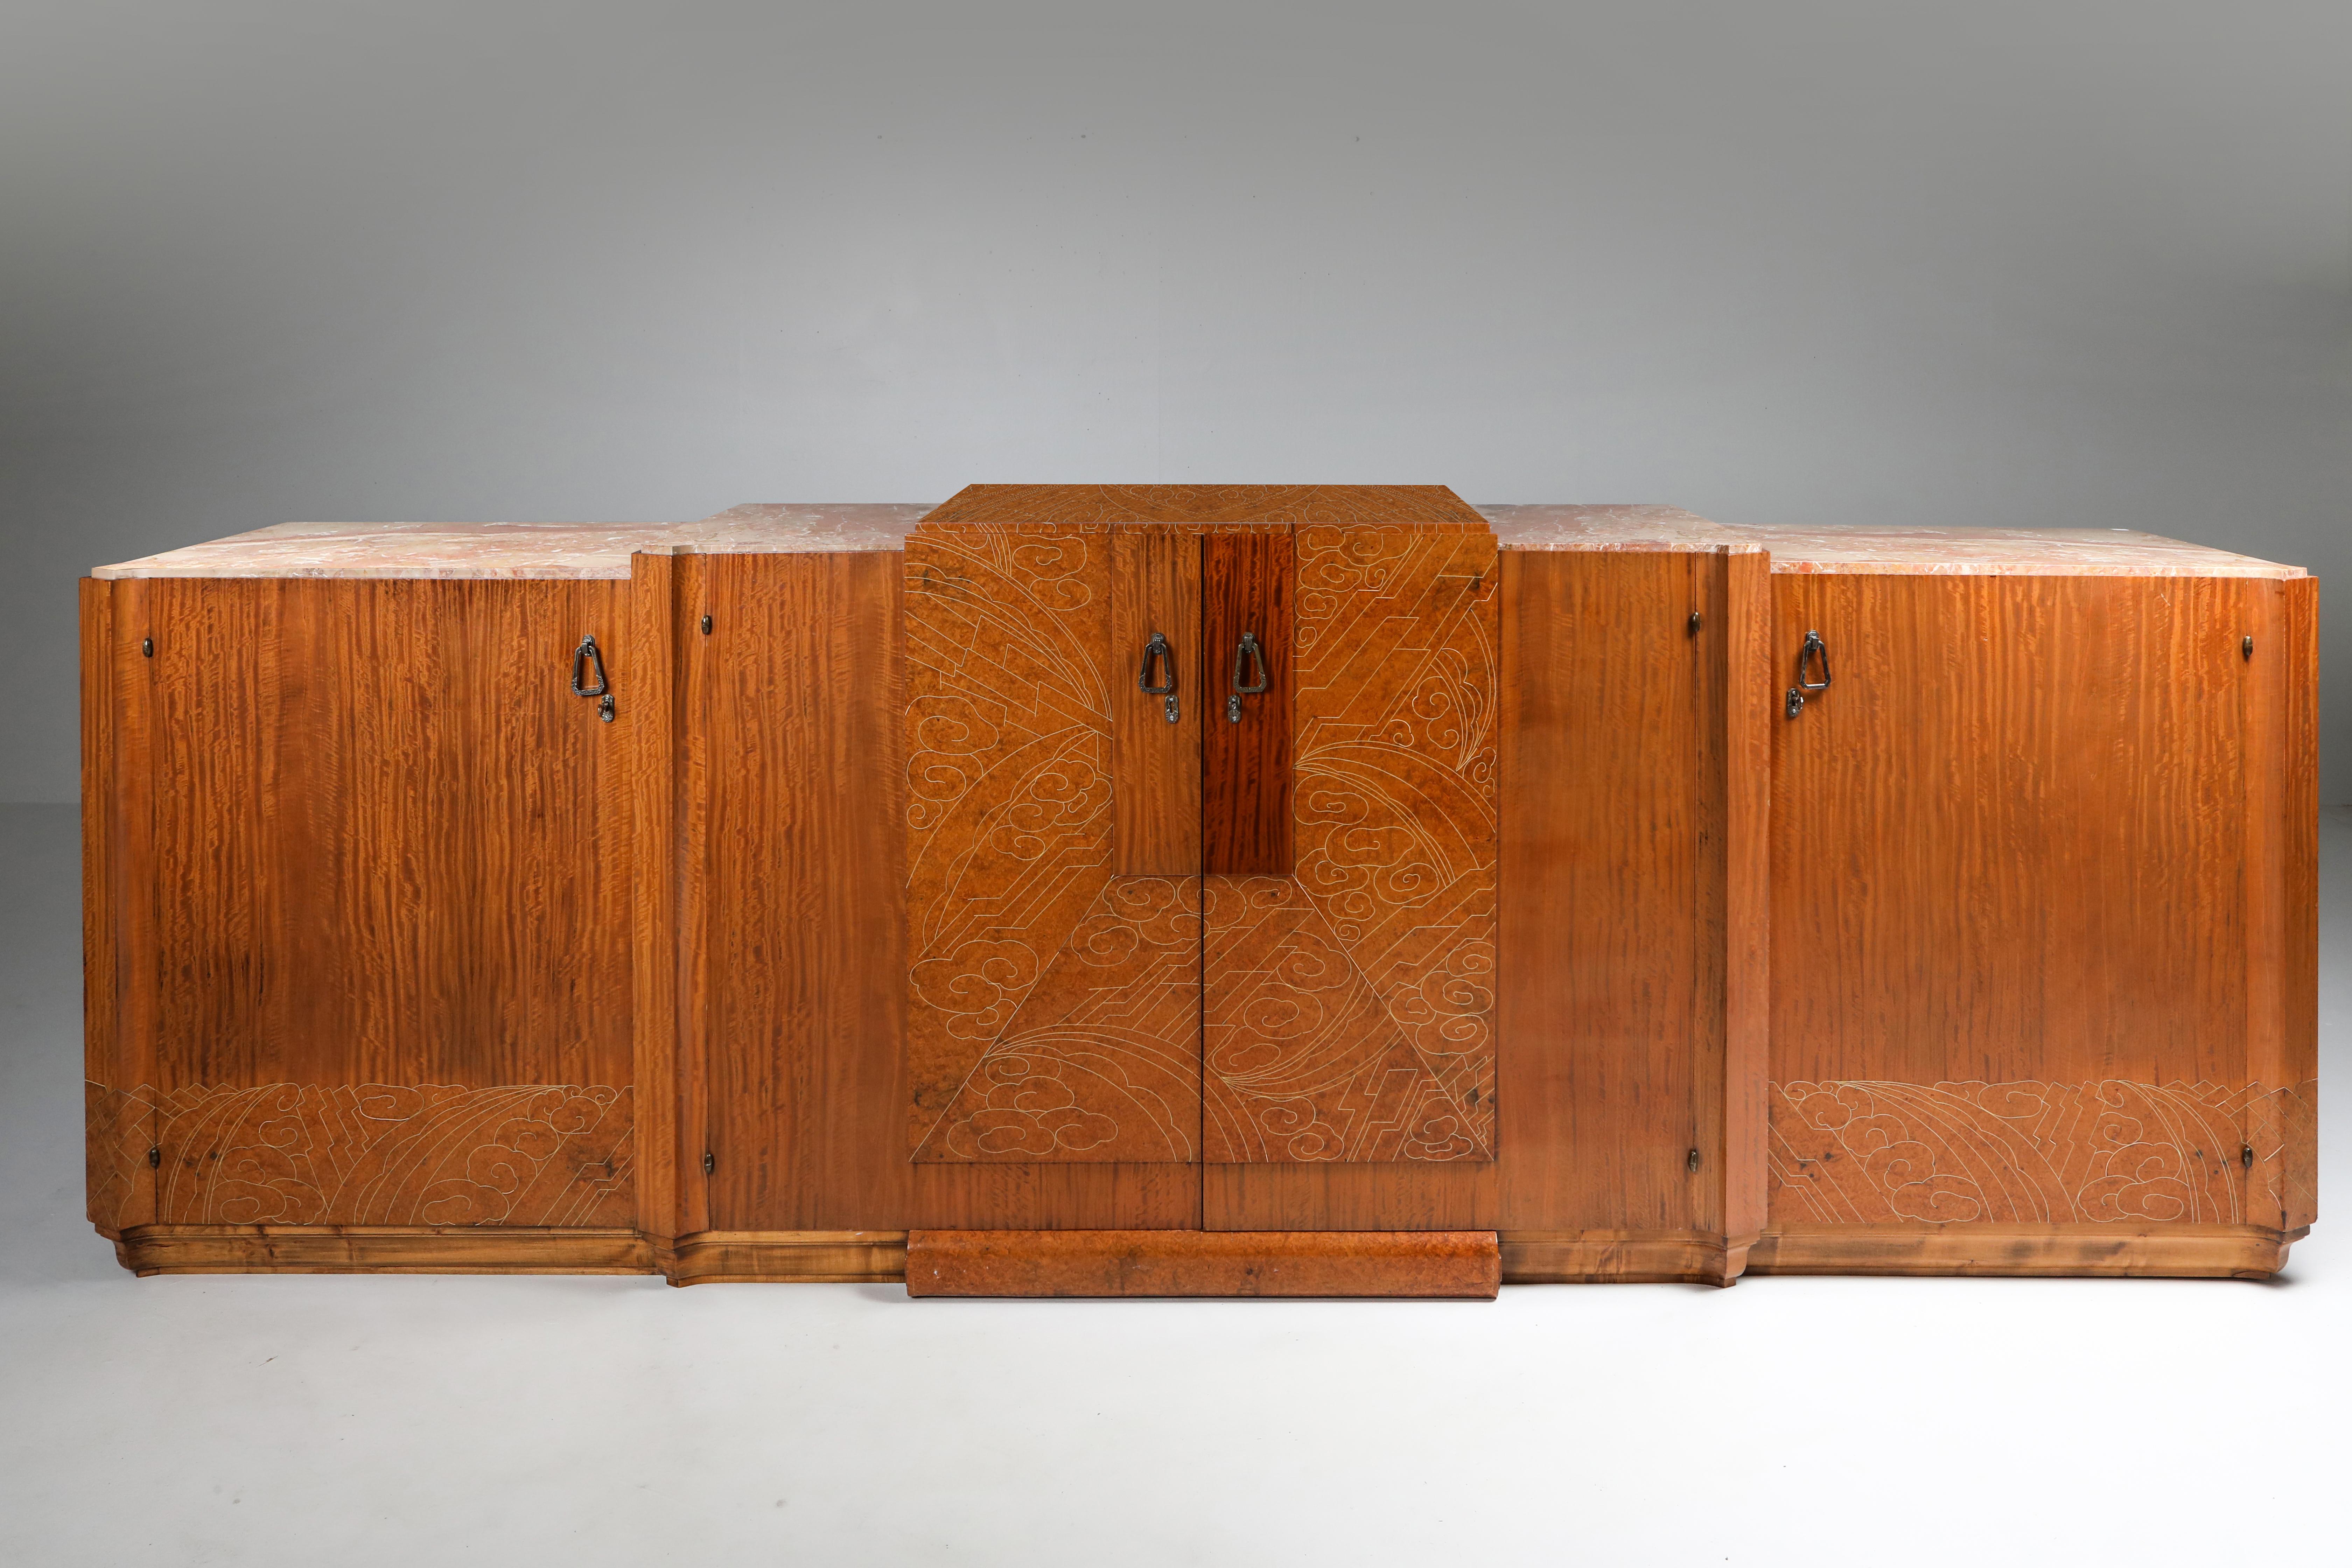 Art Deco sideboard in mahogany, burl, loupe d'amboine and marble, France, 1930s.

High-end credenza in a variety of top class materials. The stylish celluloid inlay on the top and door panels display an incredible amount of artistic talent,